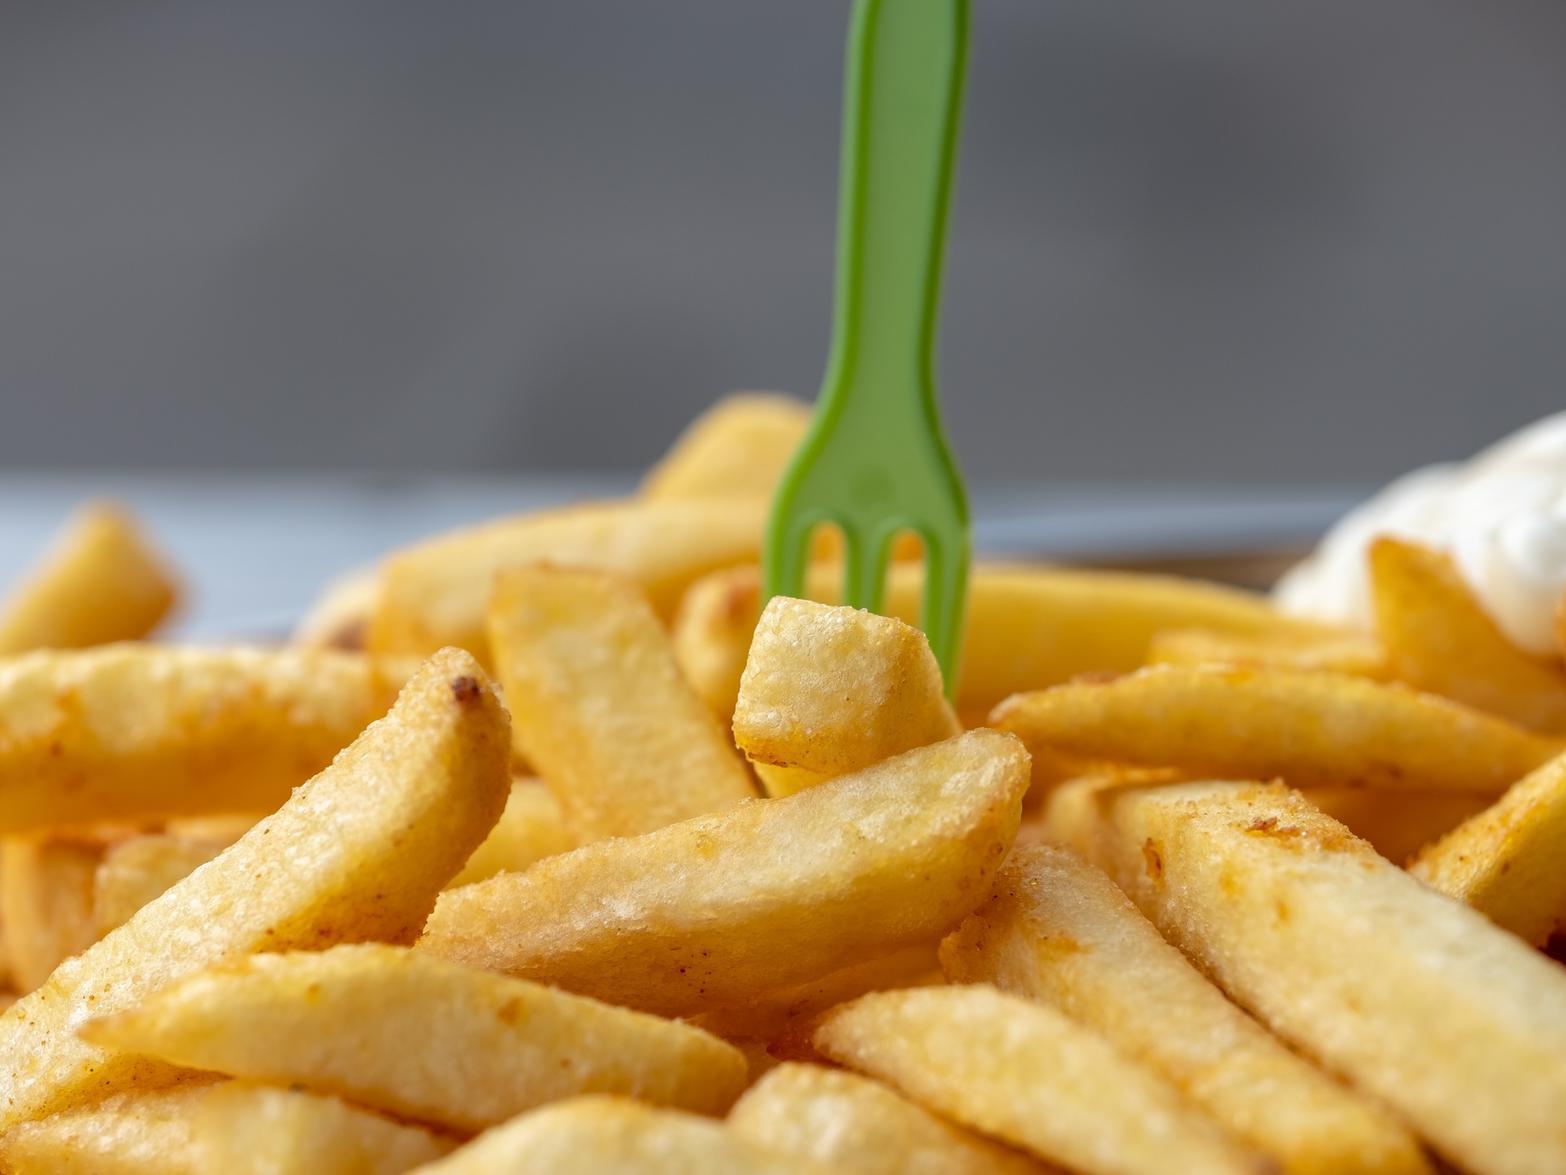 Chips and reheating fast food fries